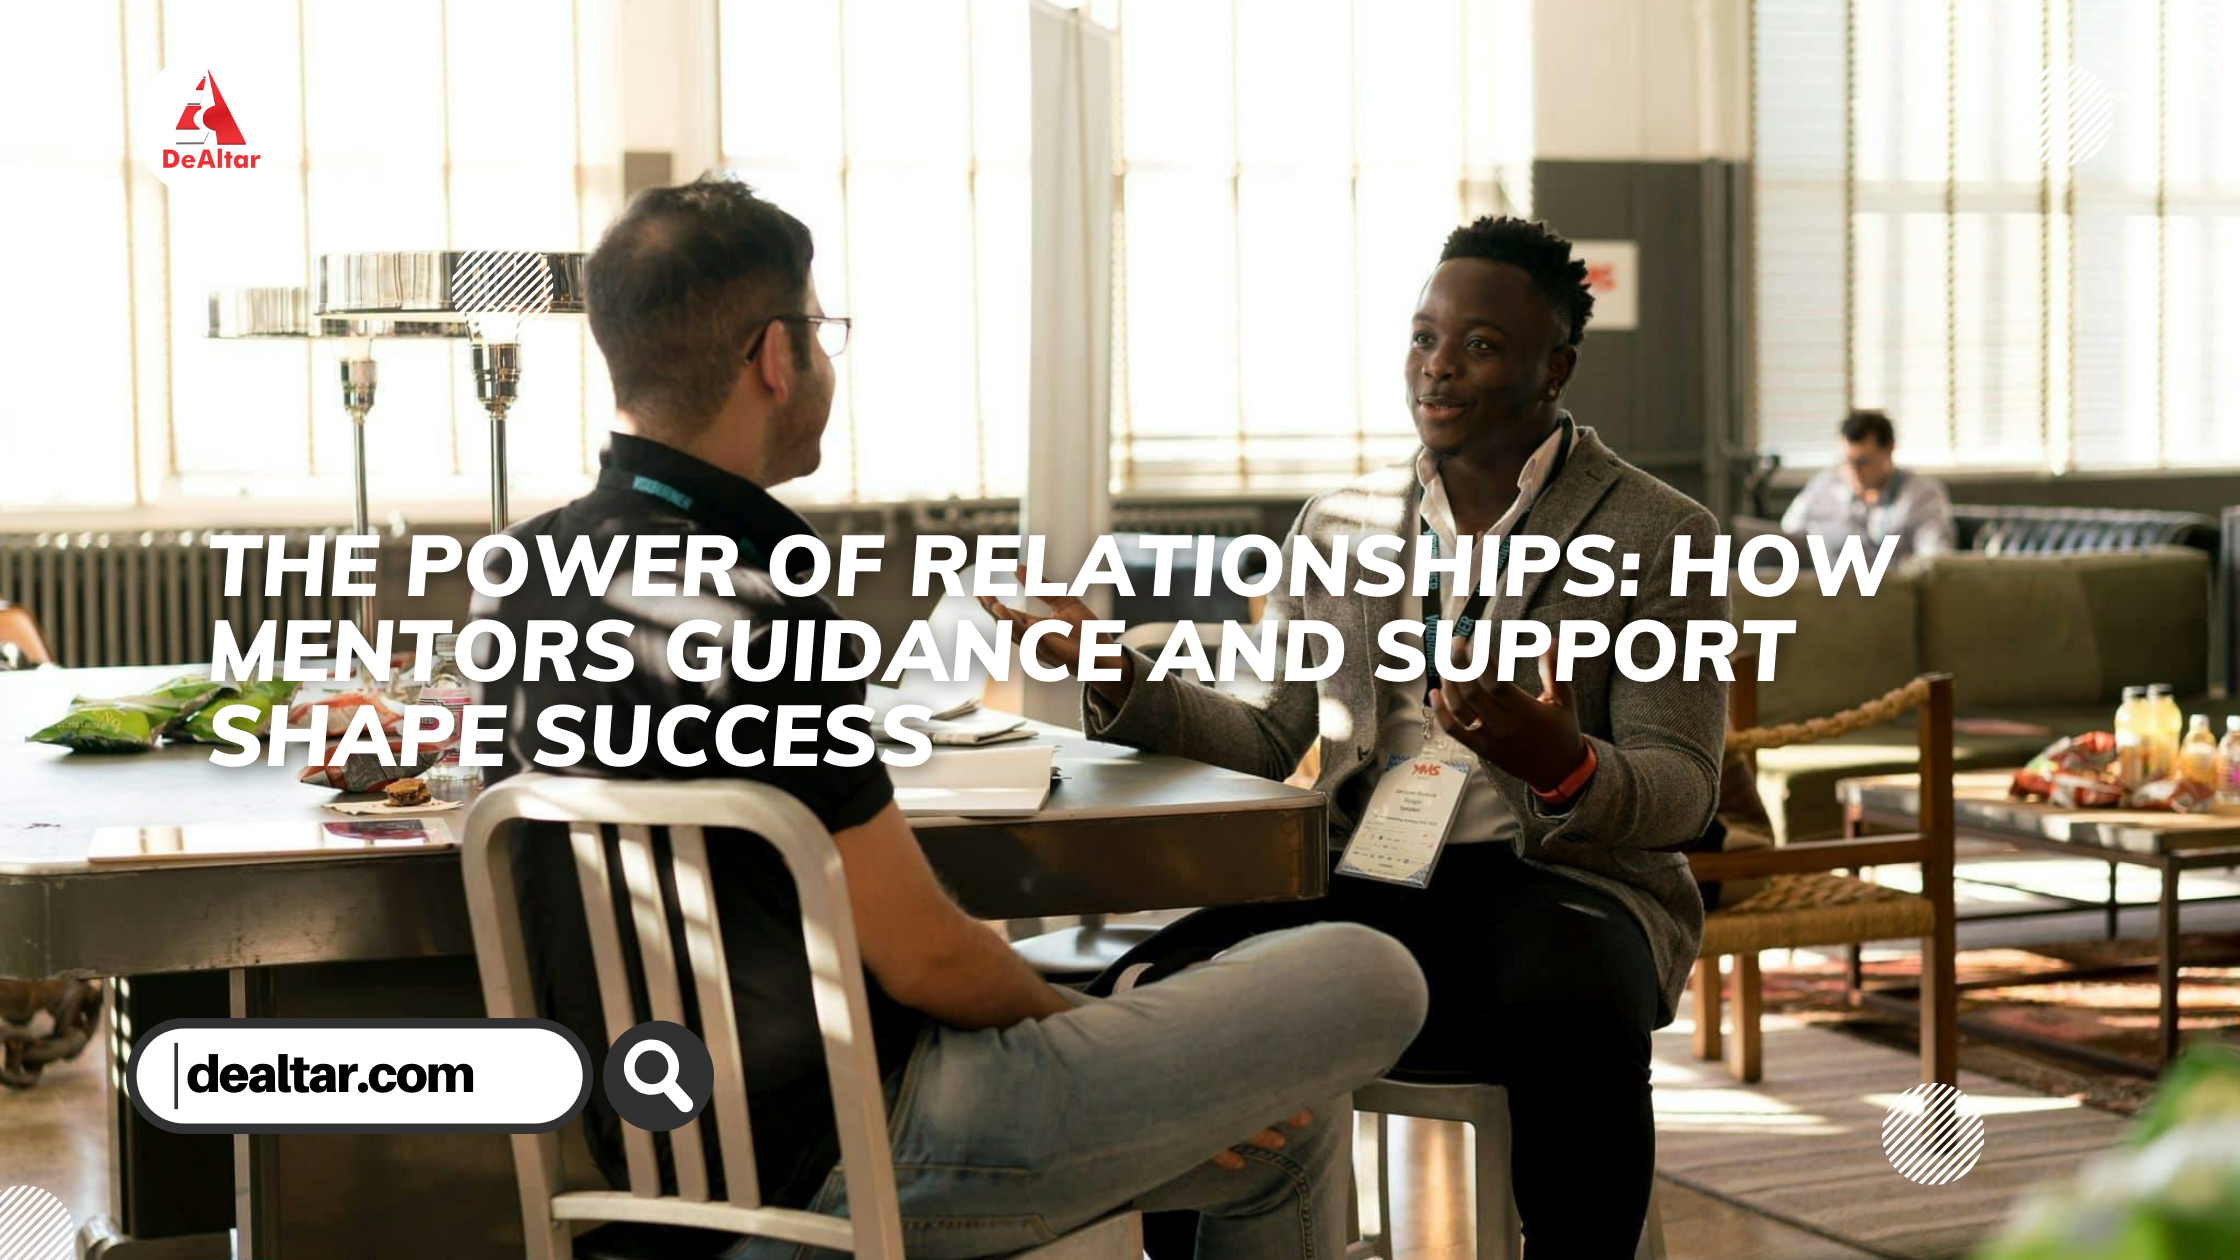 The power of relationships: How mentors guidance and support shape success